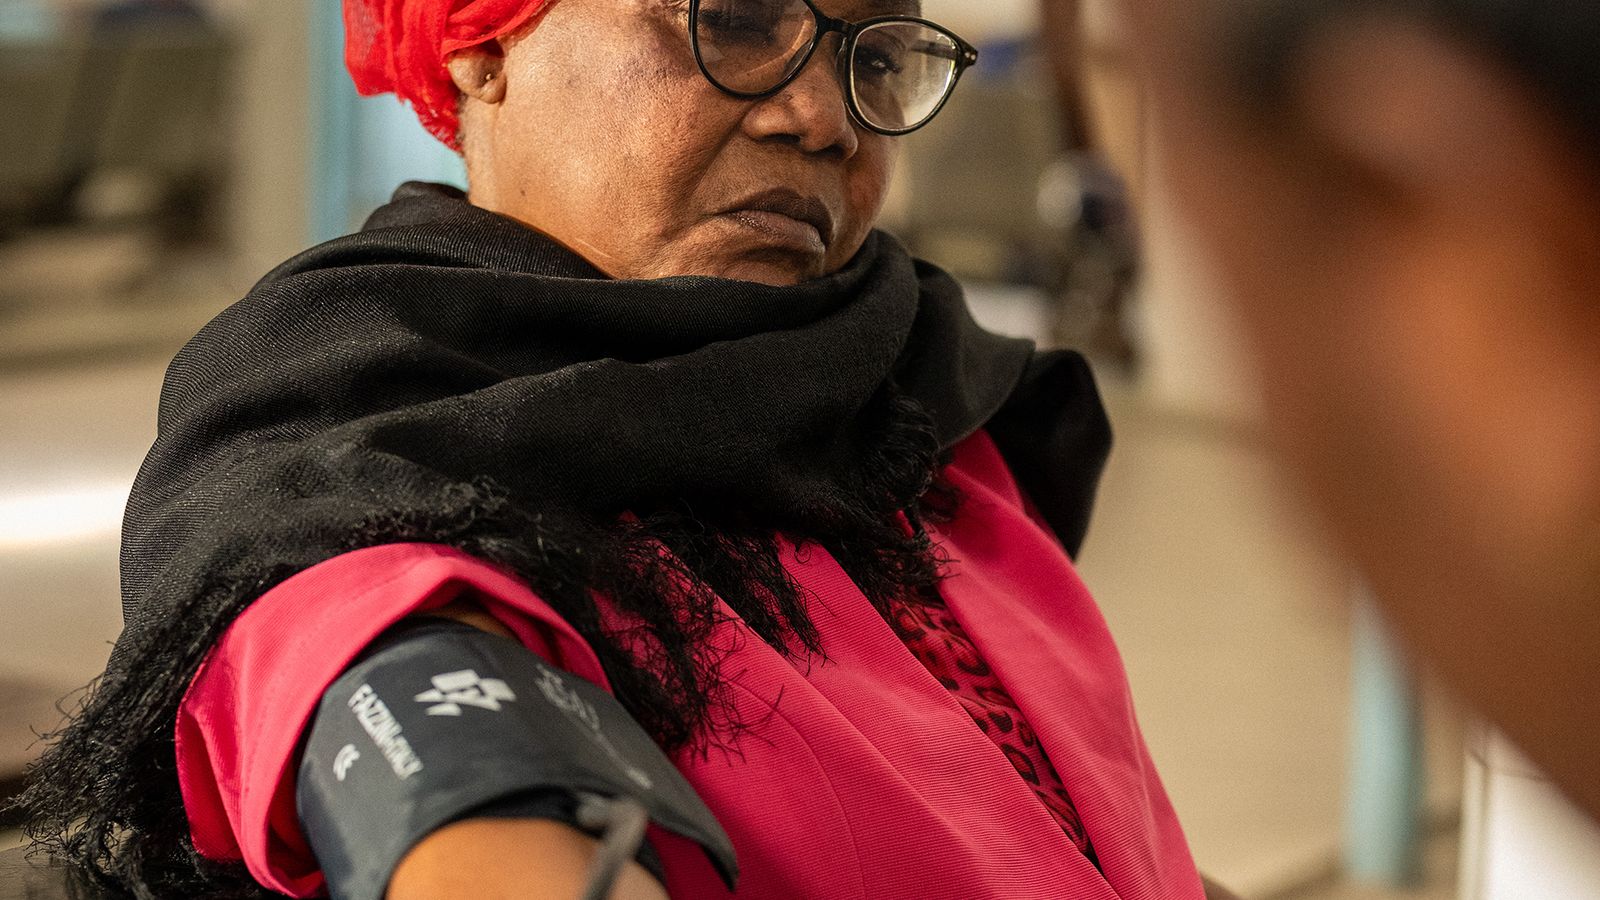 Mary Mwinqira, a patient living with diabetes, has her blood pressure taken, Dar es Salaam, Tanzania